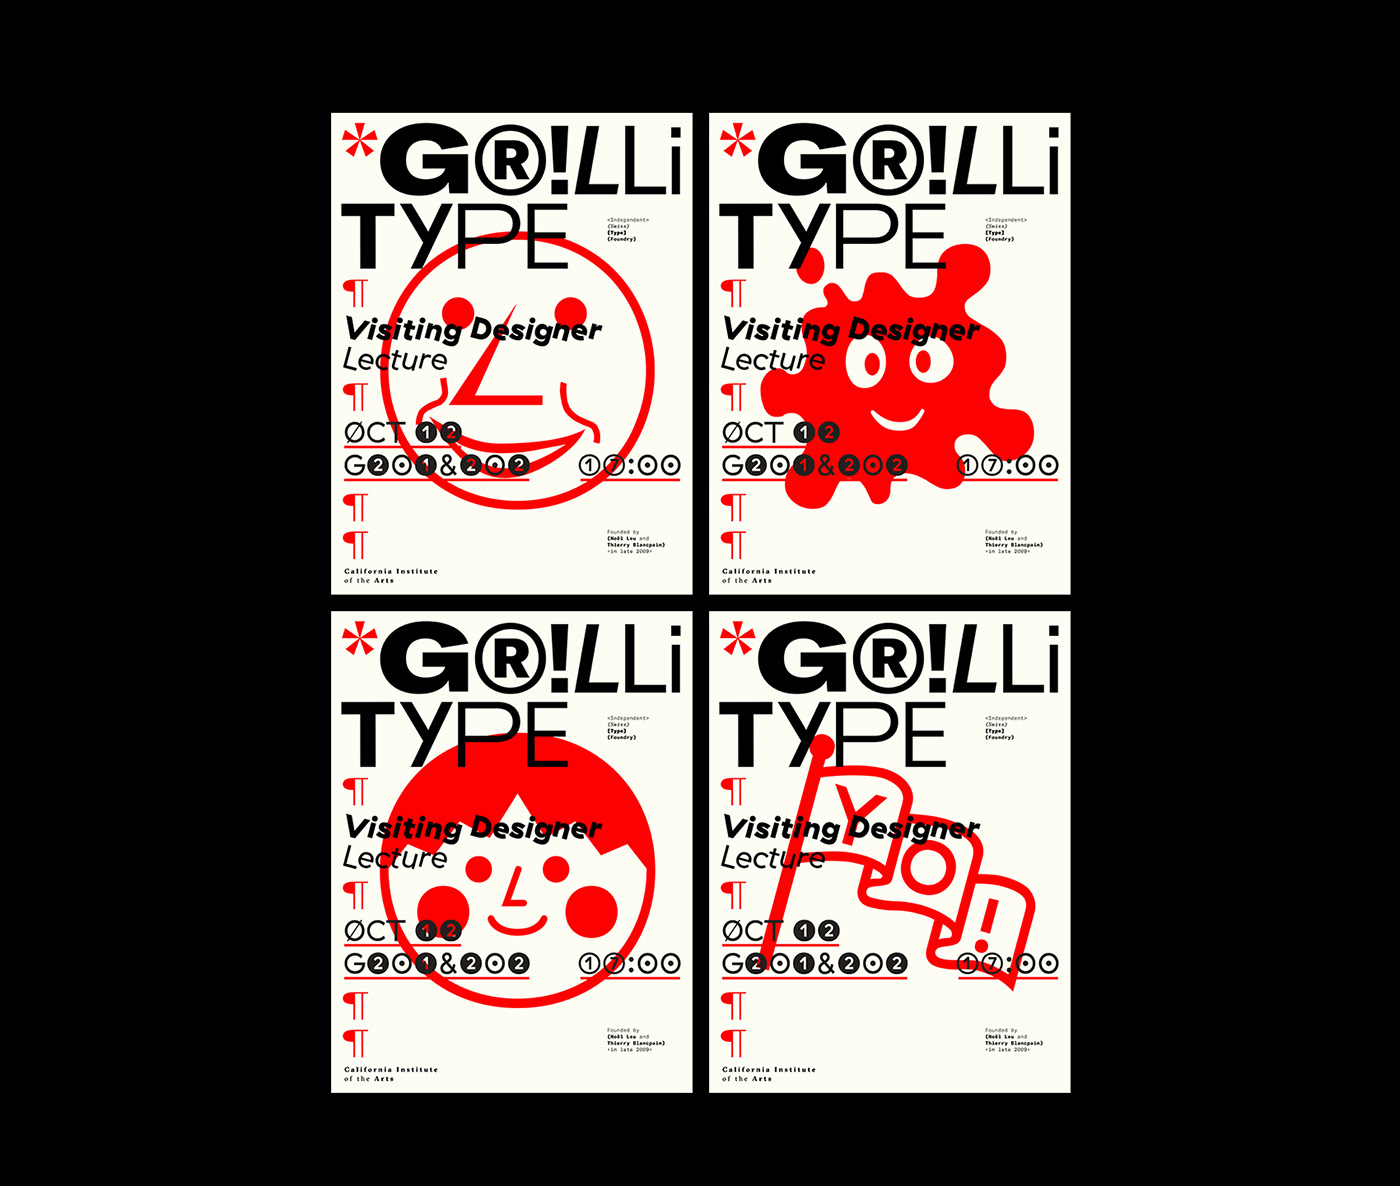 grilli Typeface type Character lecture calarts red Icon